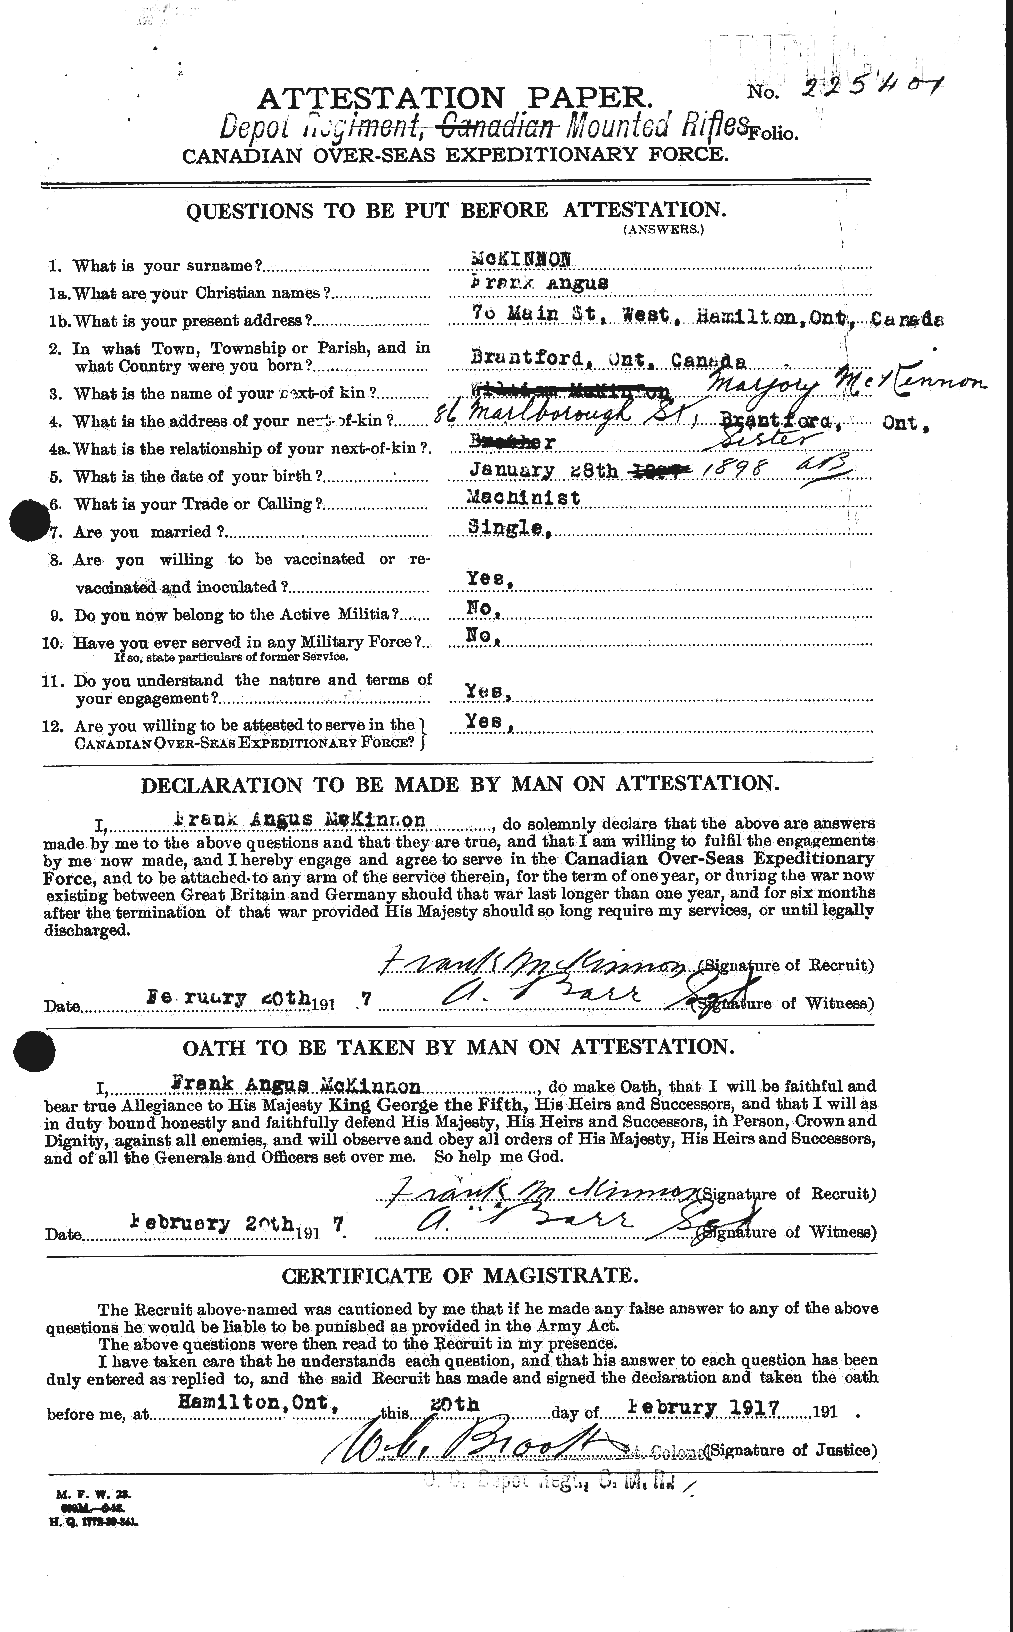 Personnel Records of the First World War - CEF 531424a